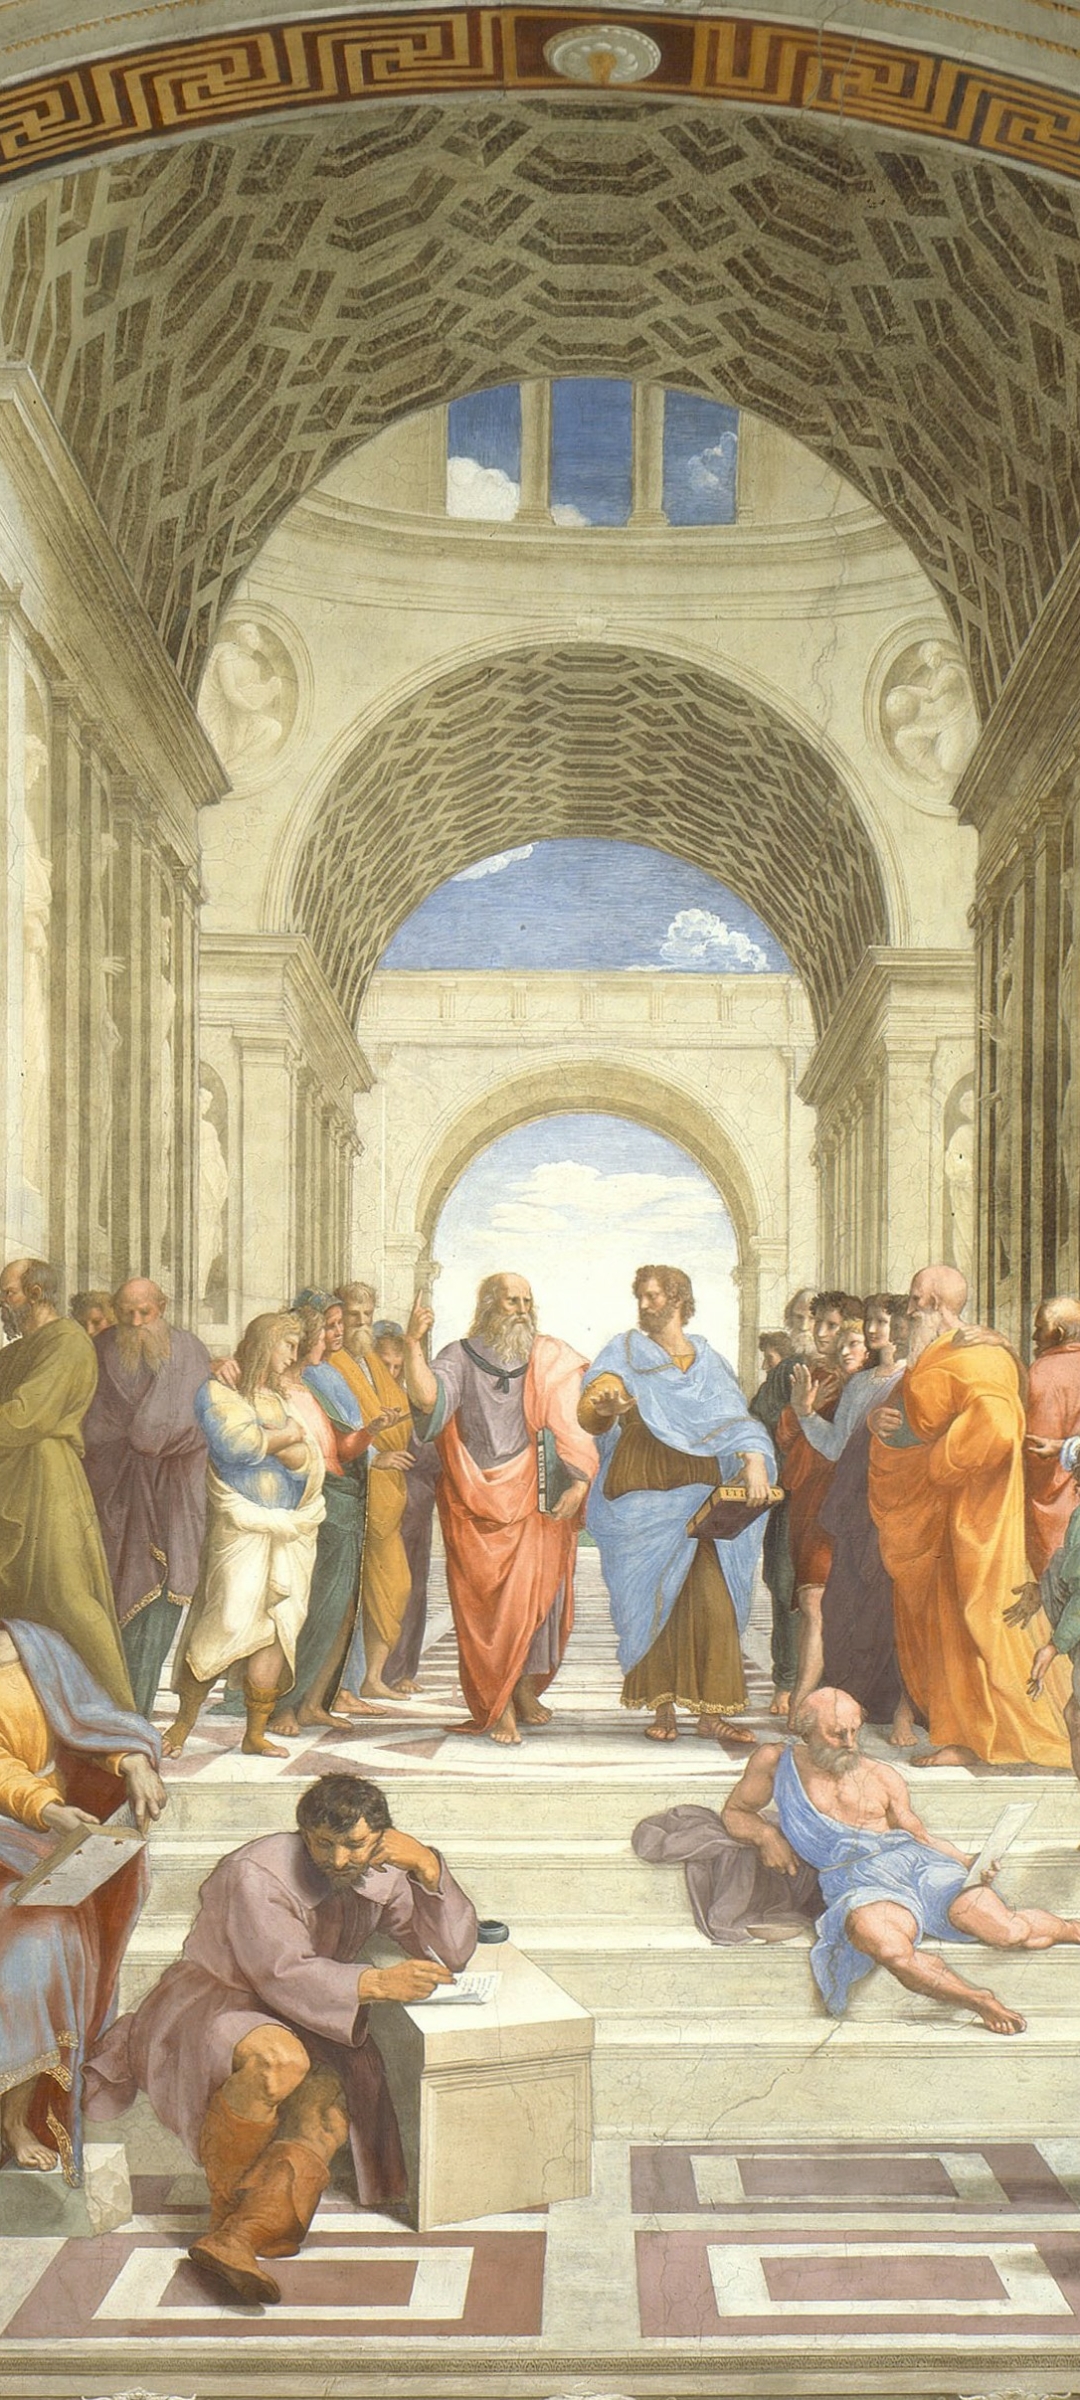 plato and socrates painting